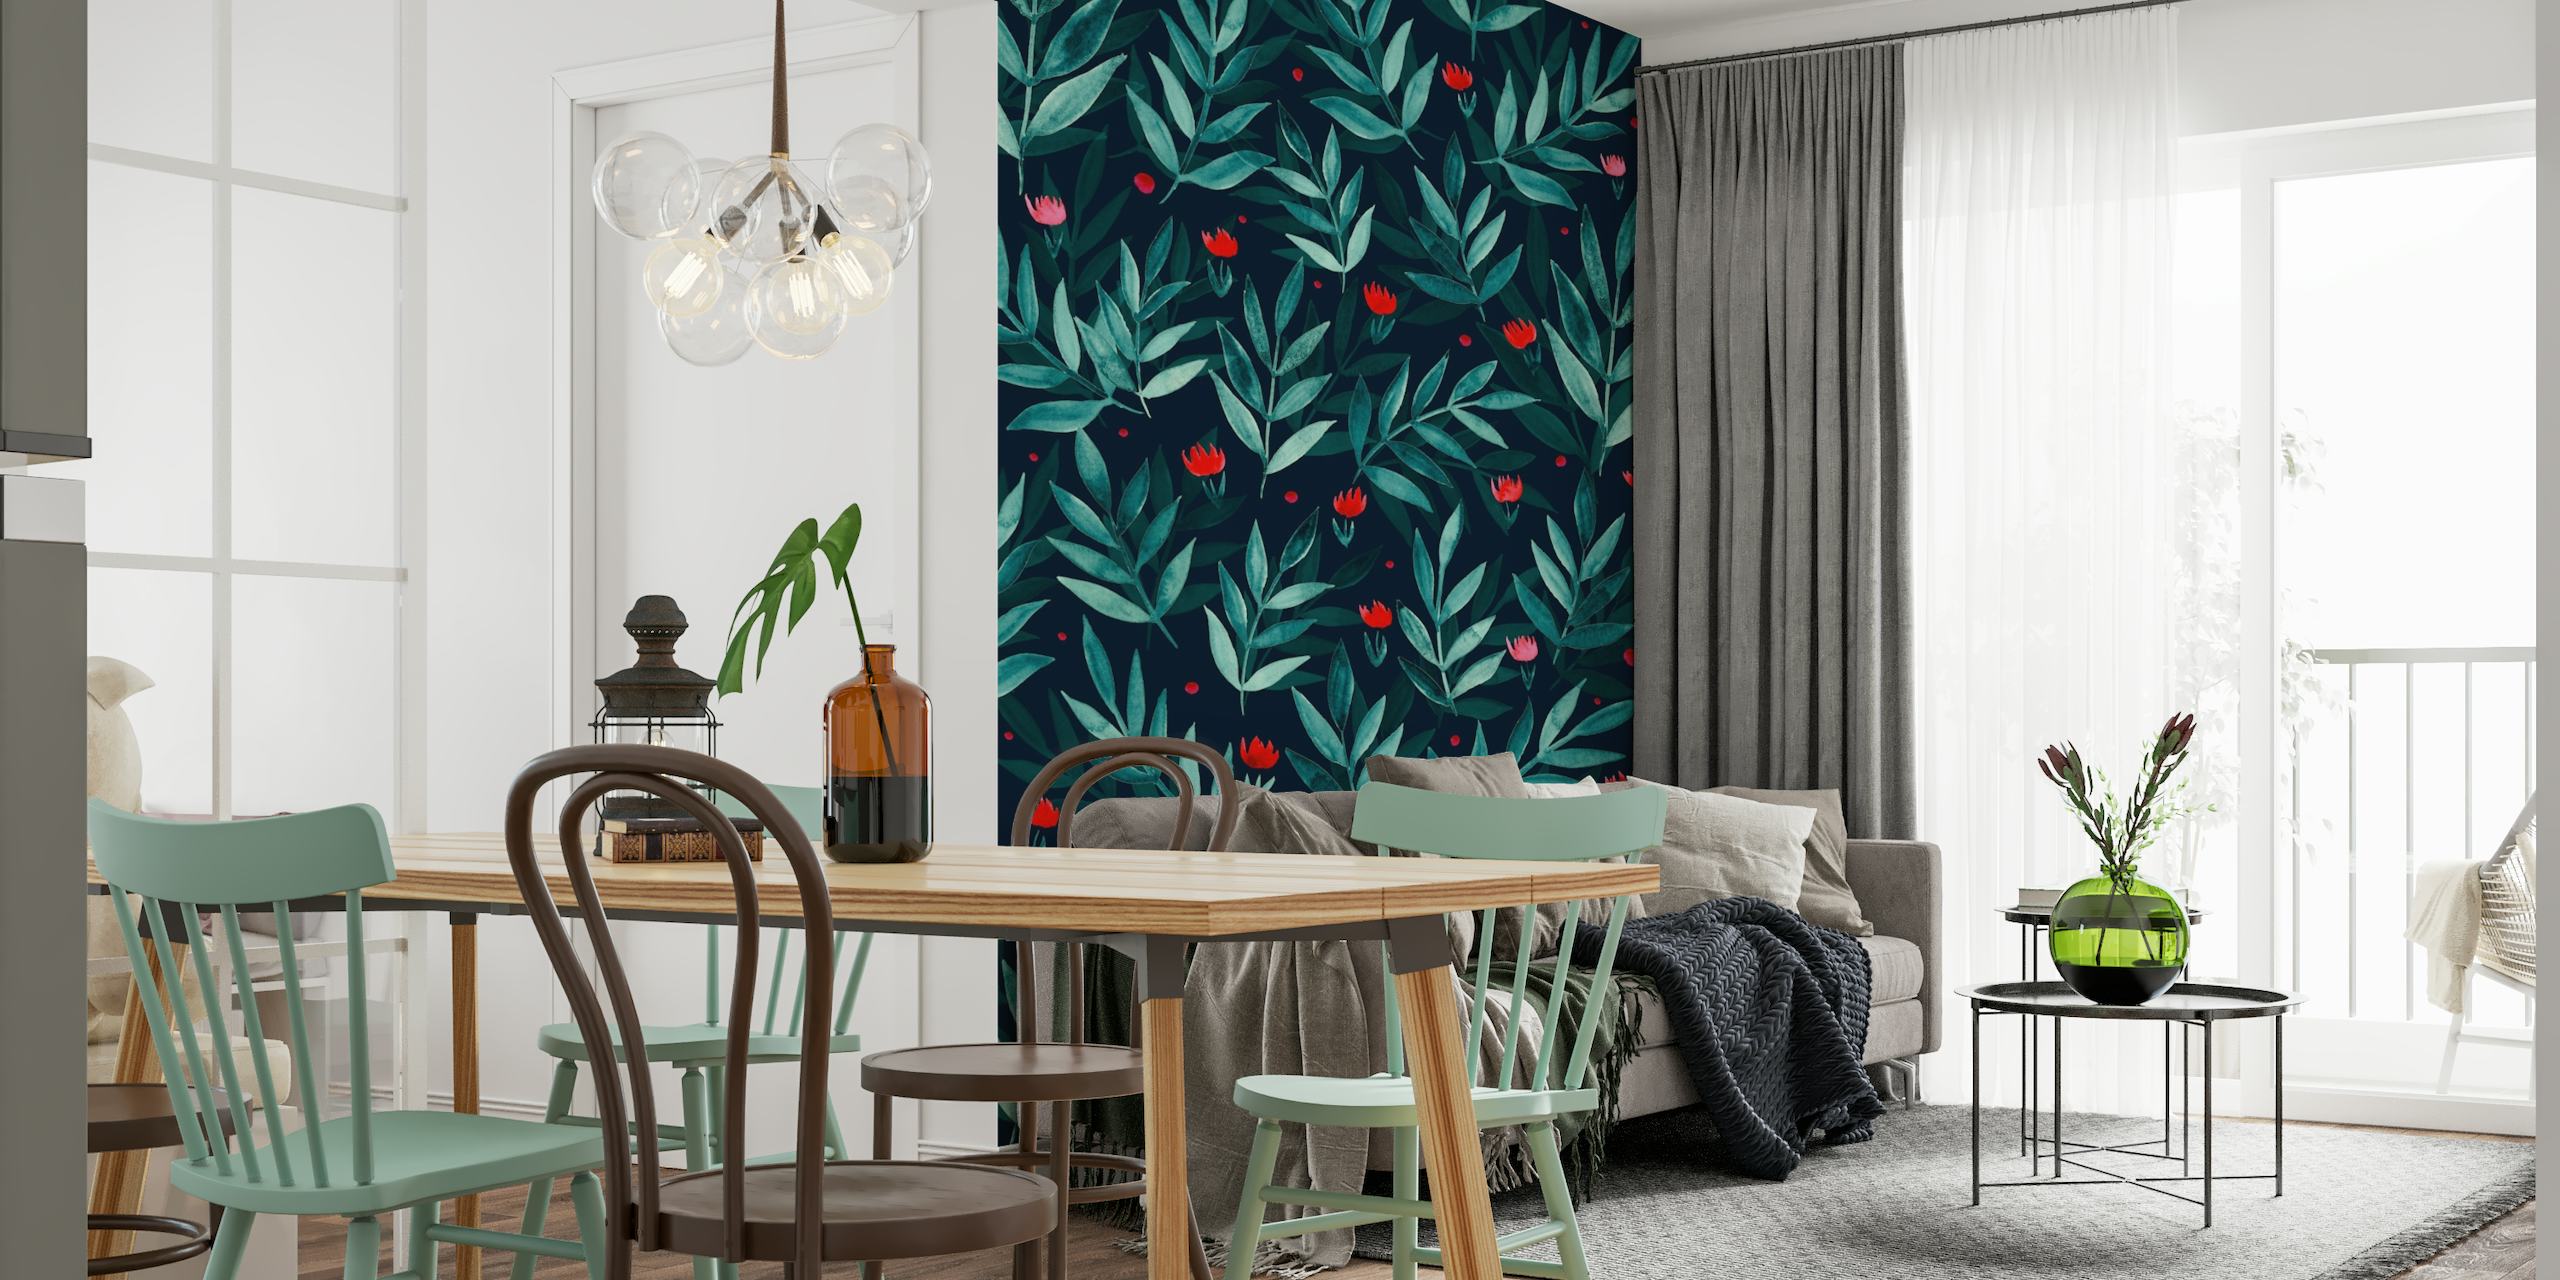 Night garden teal and red wallpaper